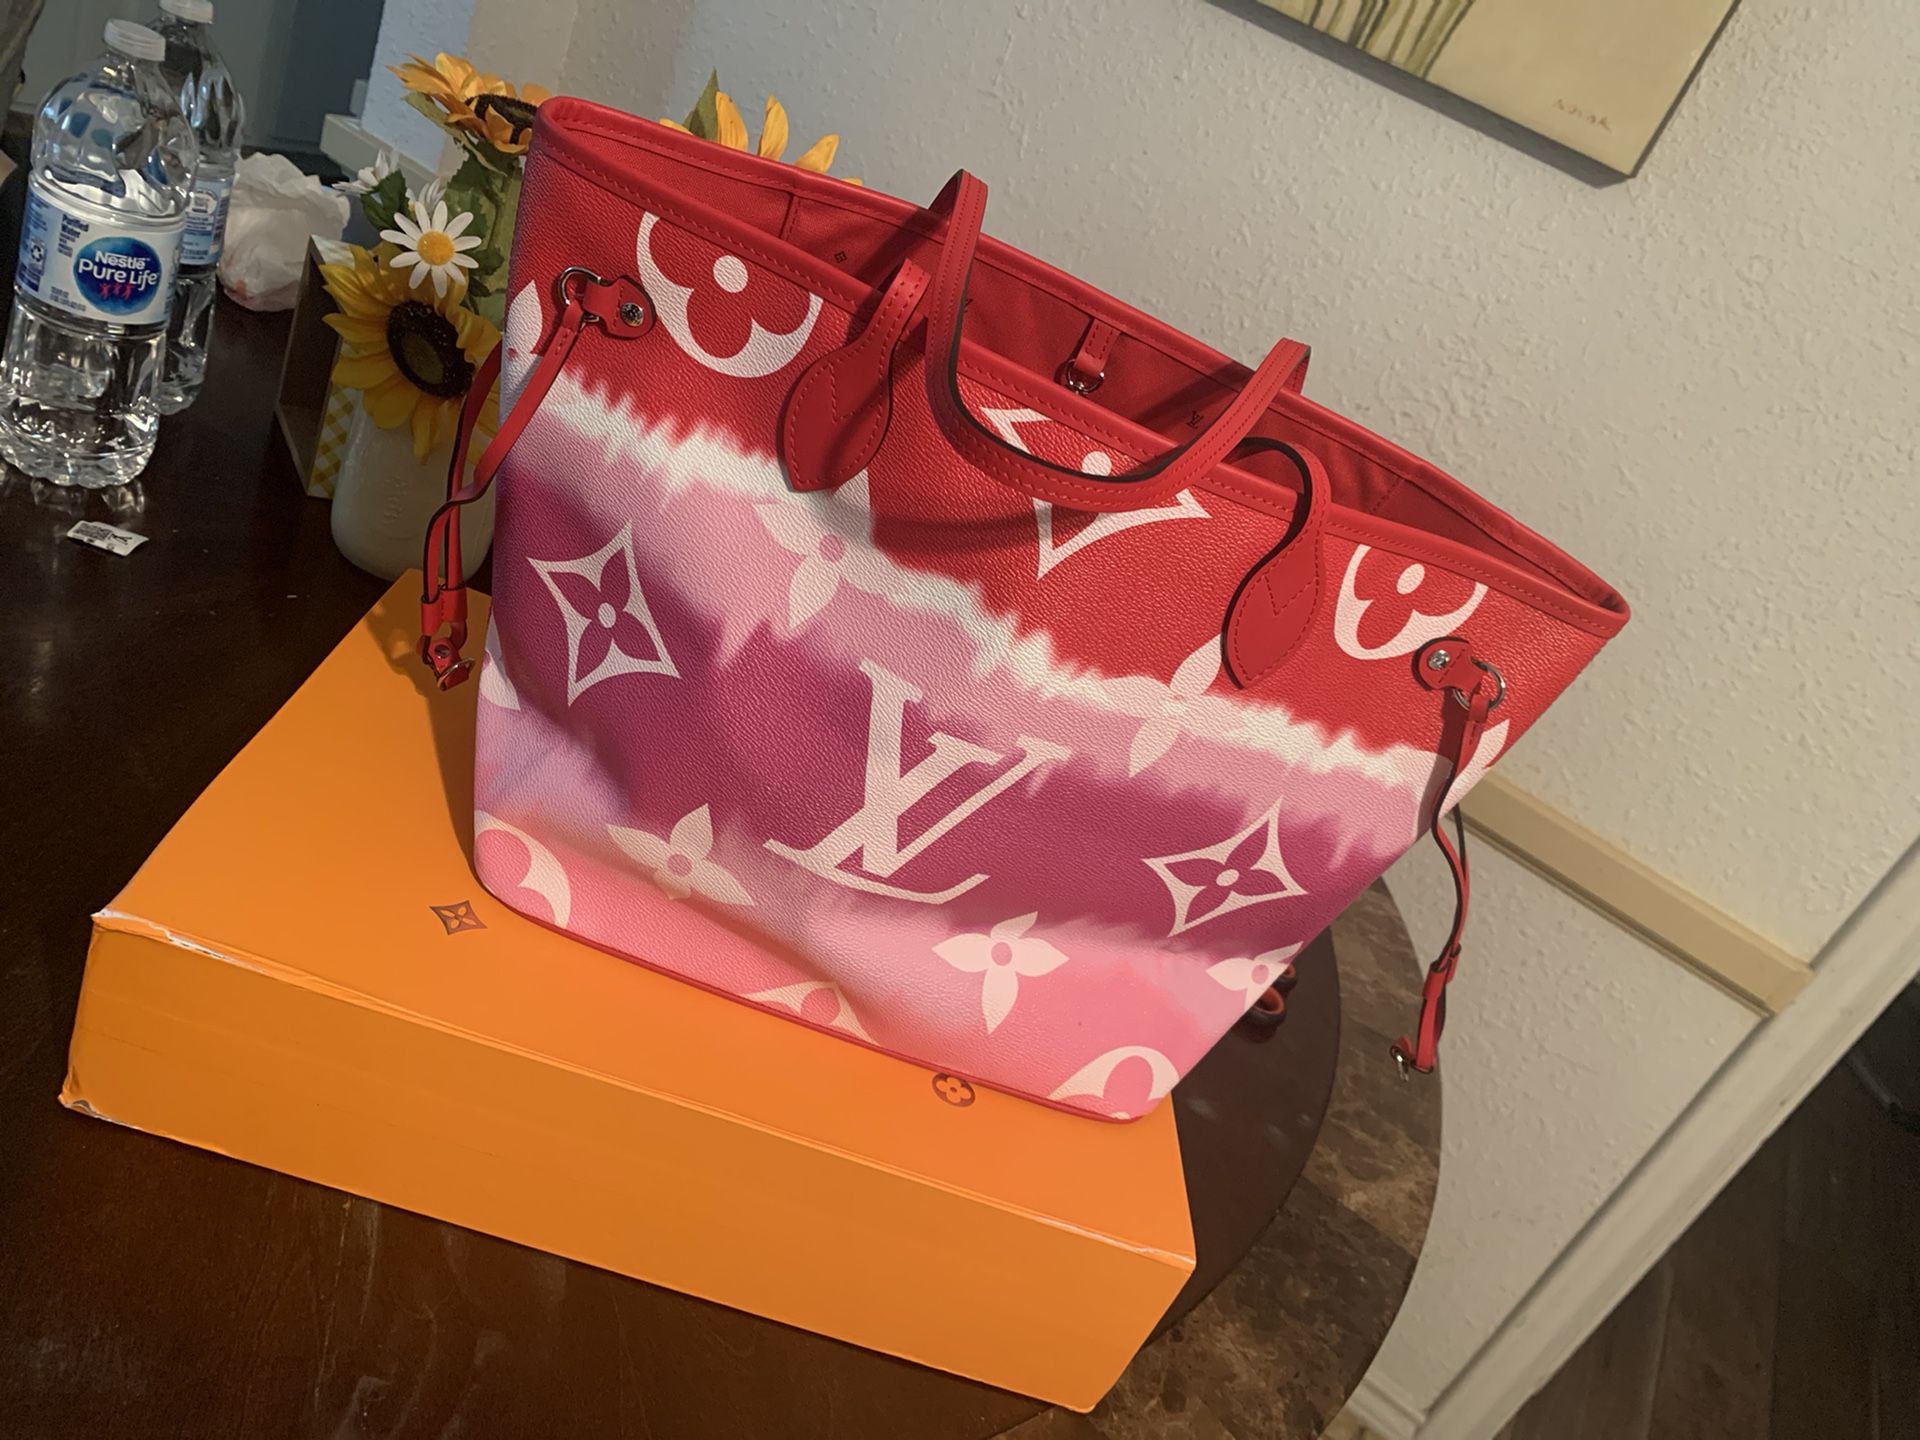 Louis Vuitton Handbags for sale in Fort Worth, Texas